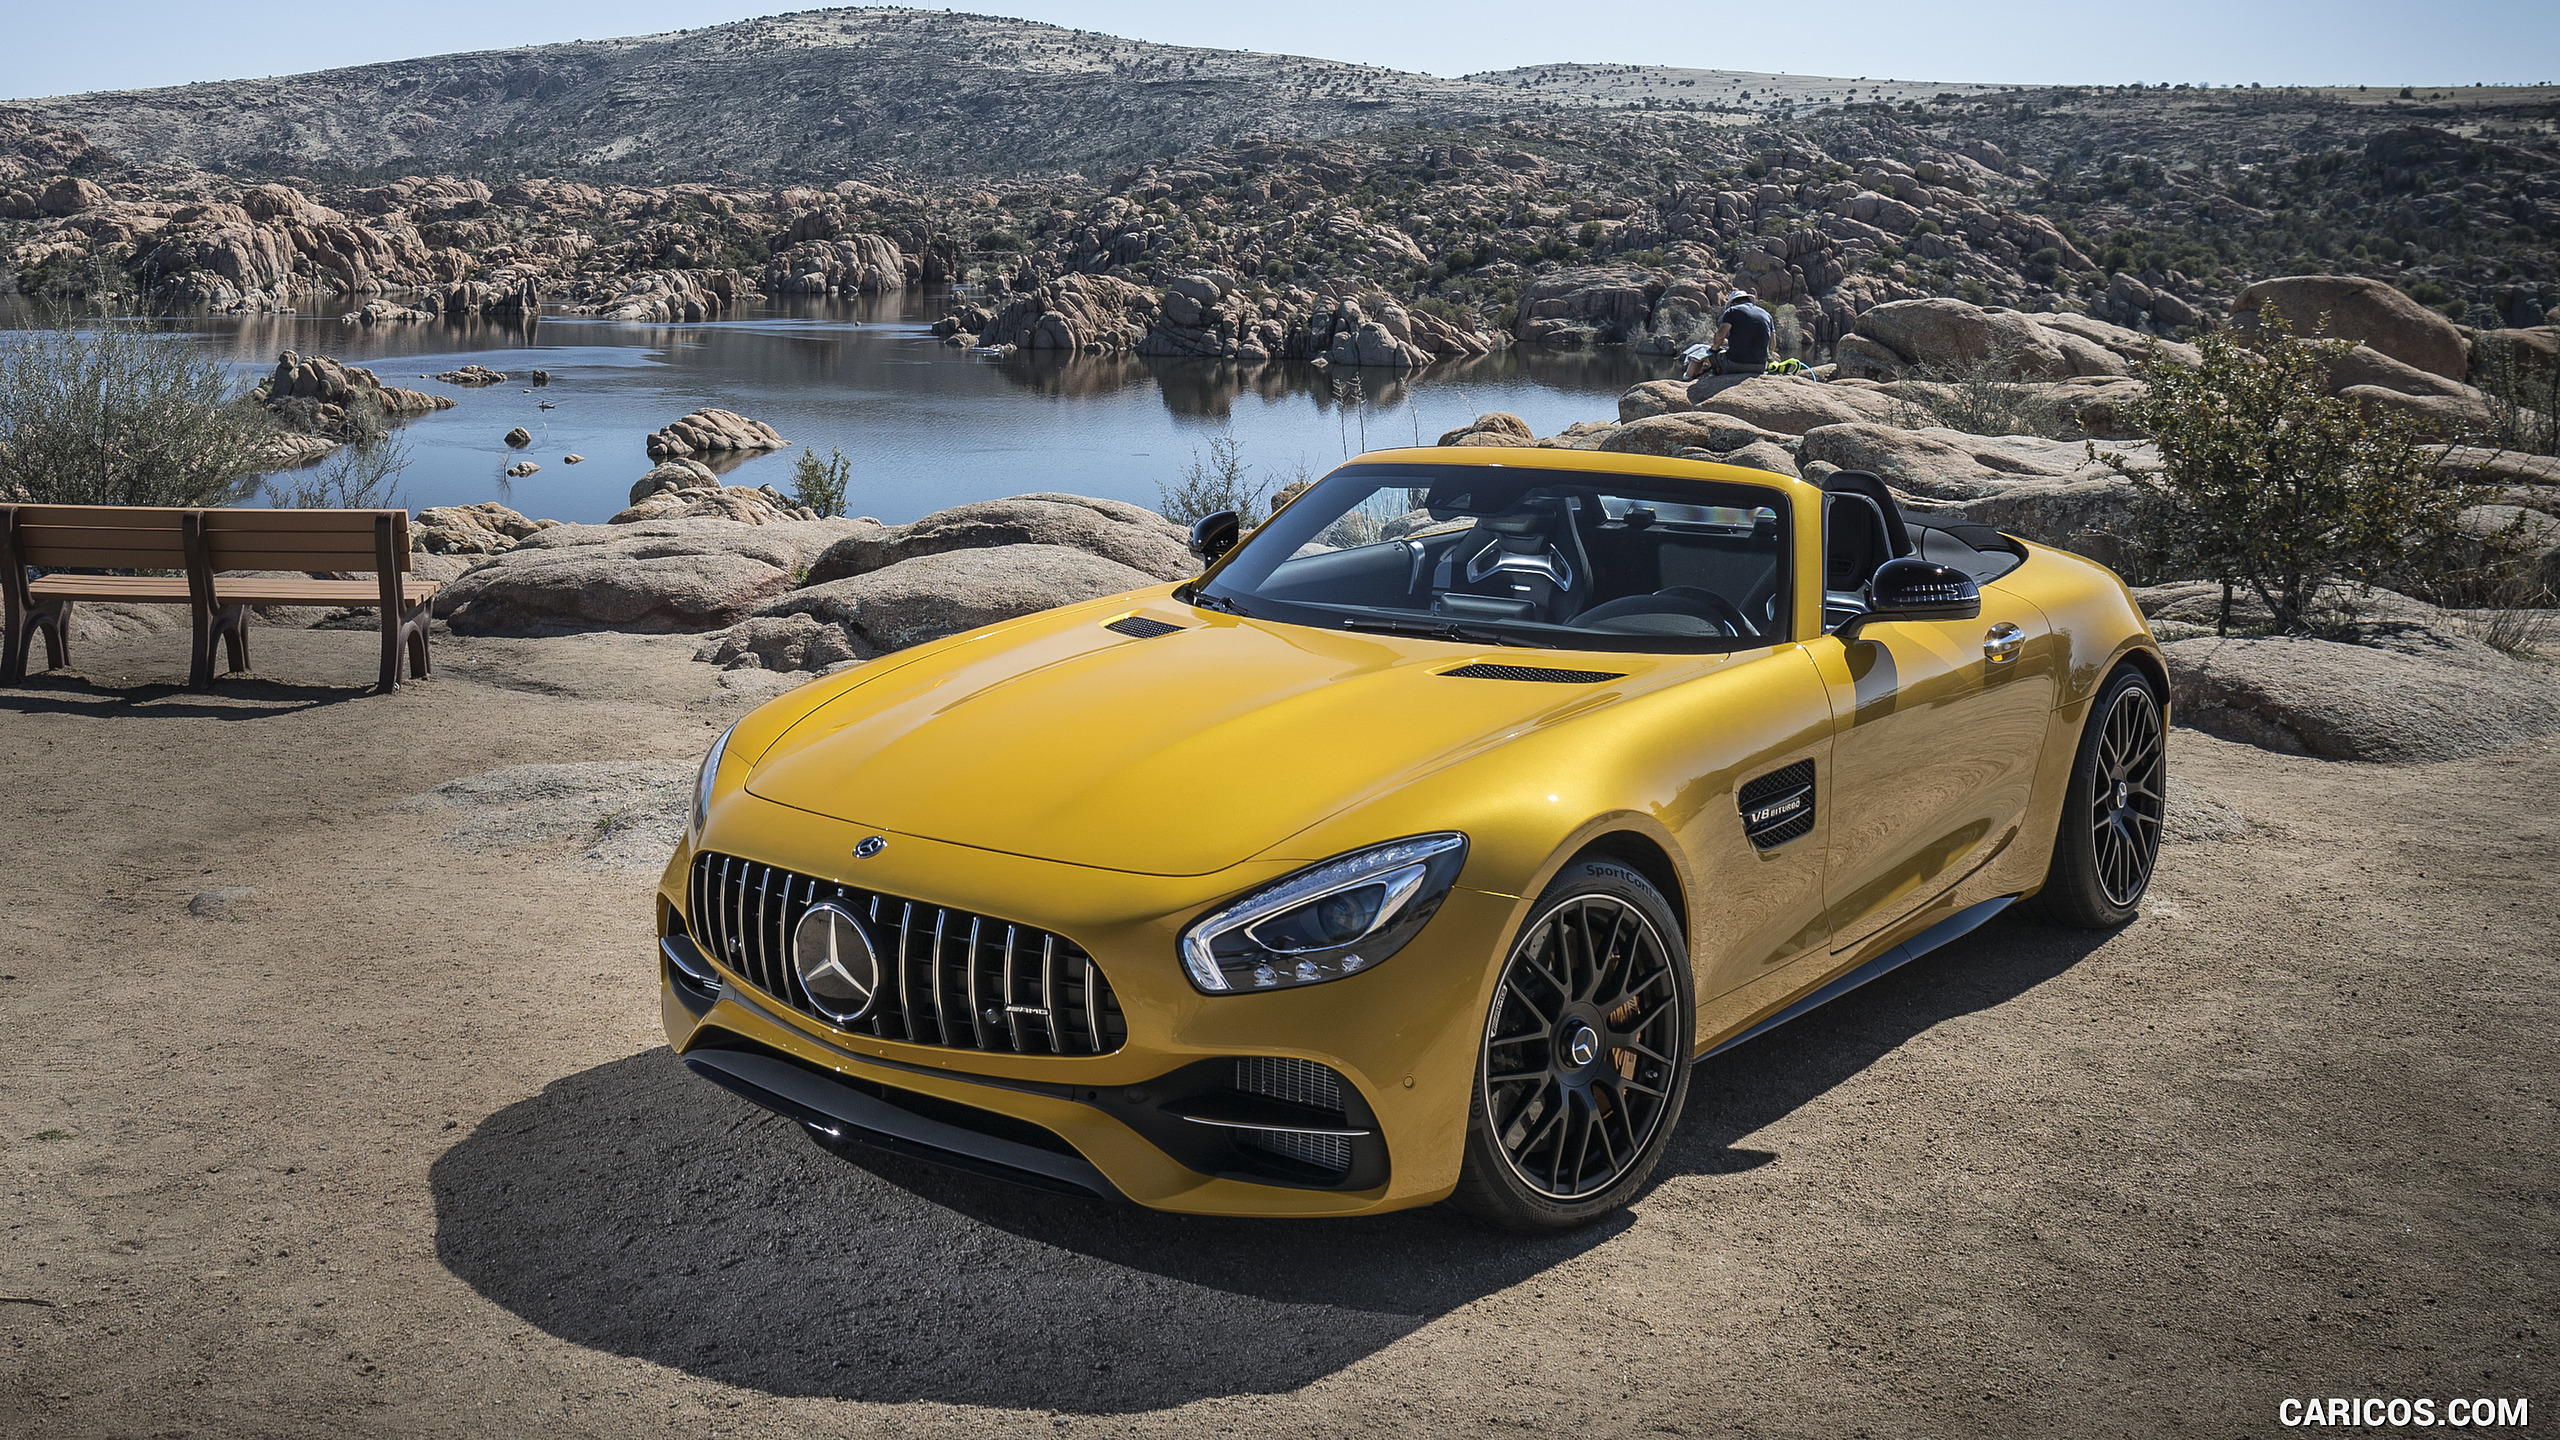 2018 Mercedes-AMG GT C Roadster - Front Three-Quarter, #170 of 350